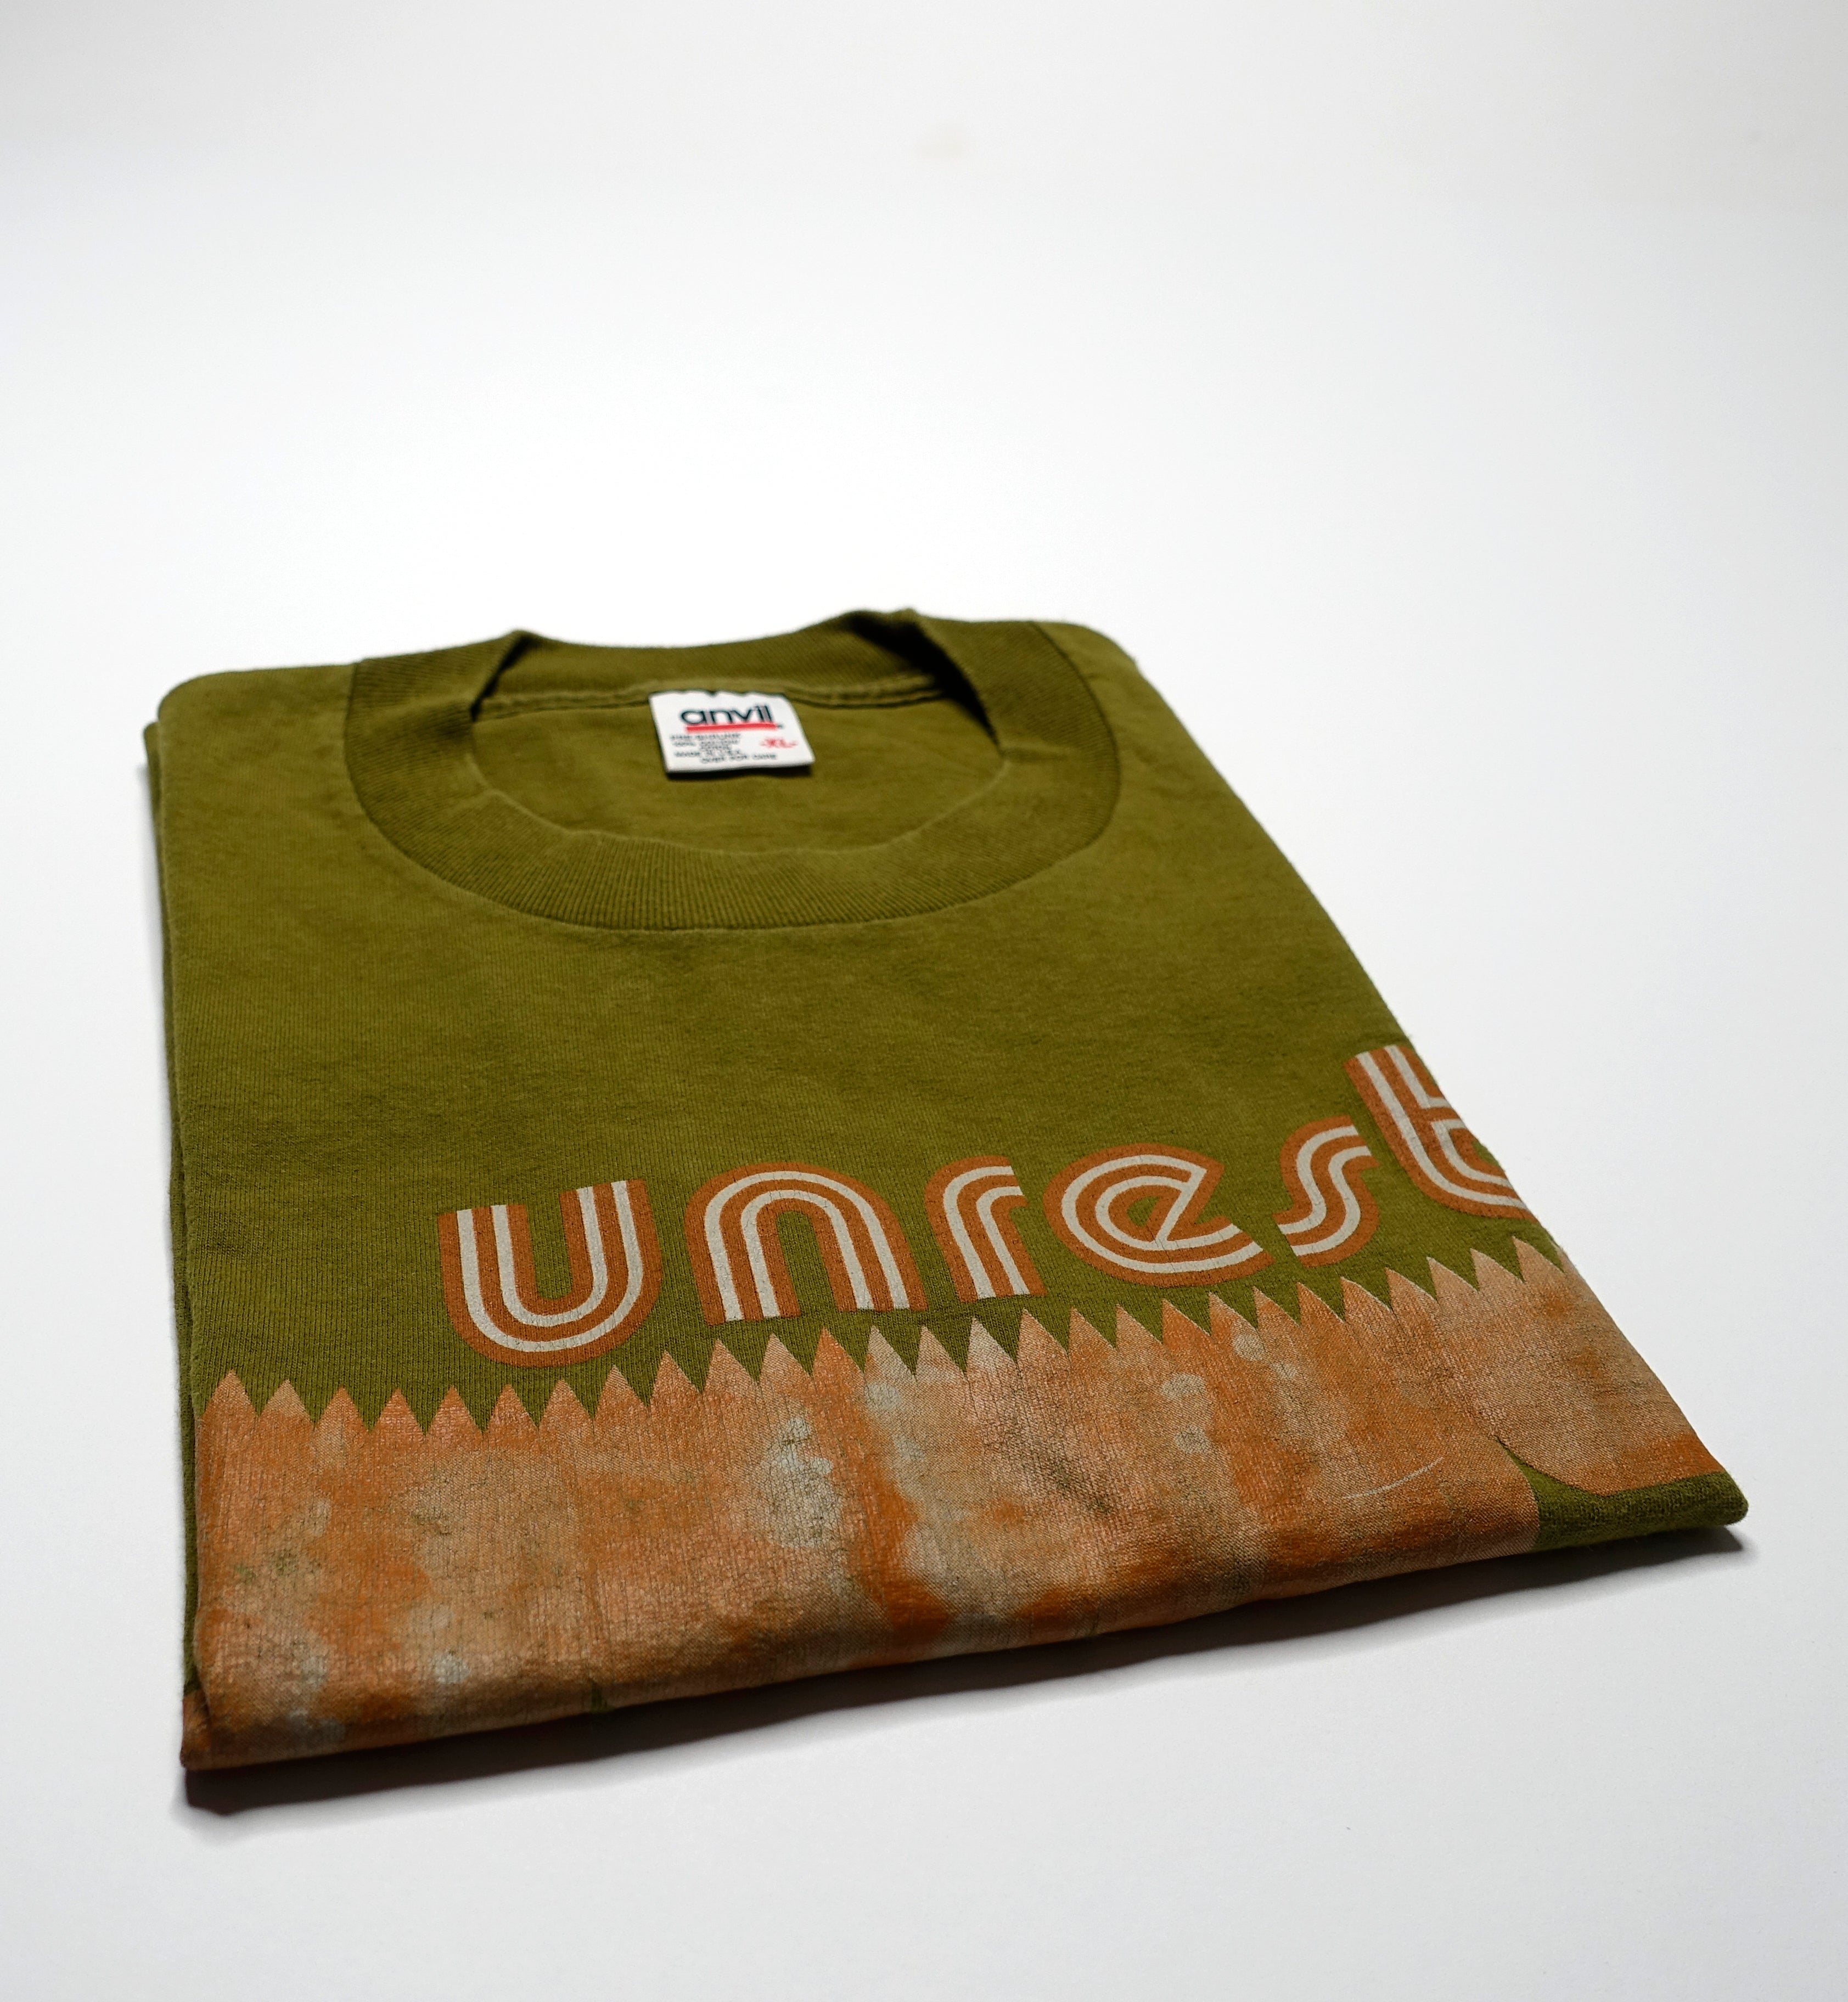 Unrest - Perfect Teeth 1993 Tour Shirt Size XL